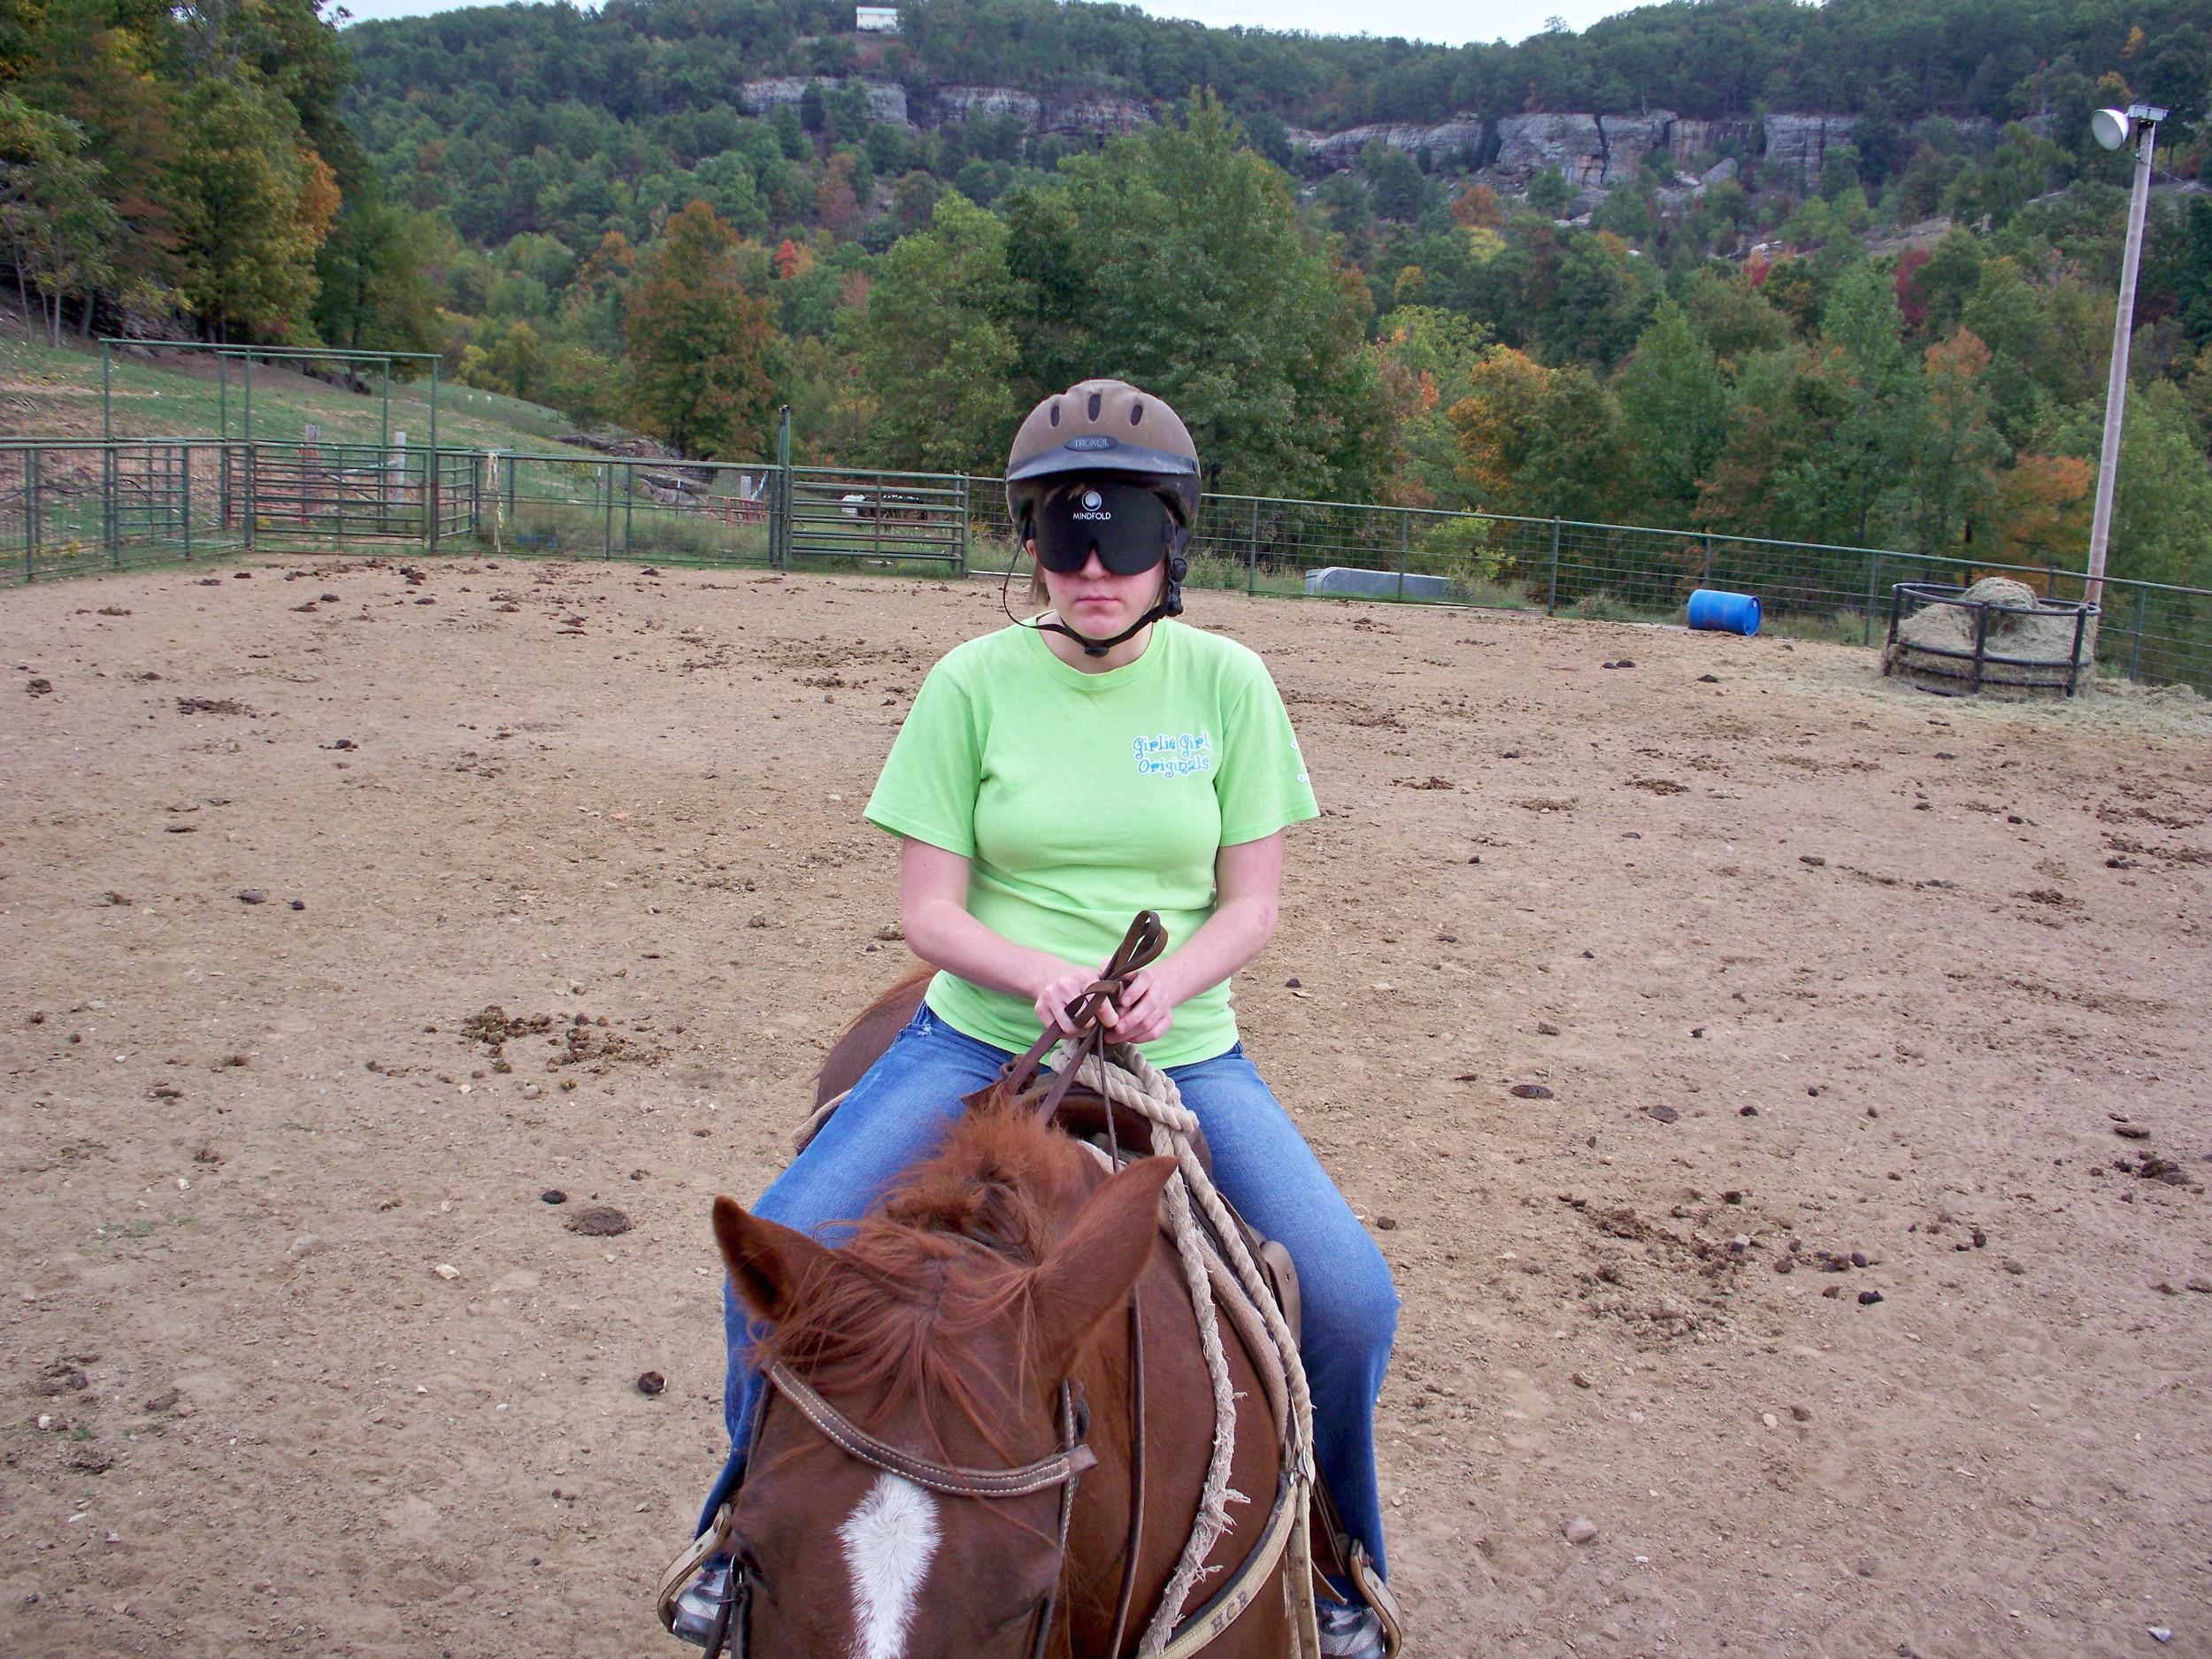 Katie riding her horse in the arena at HCR